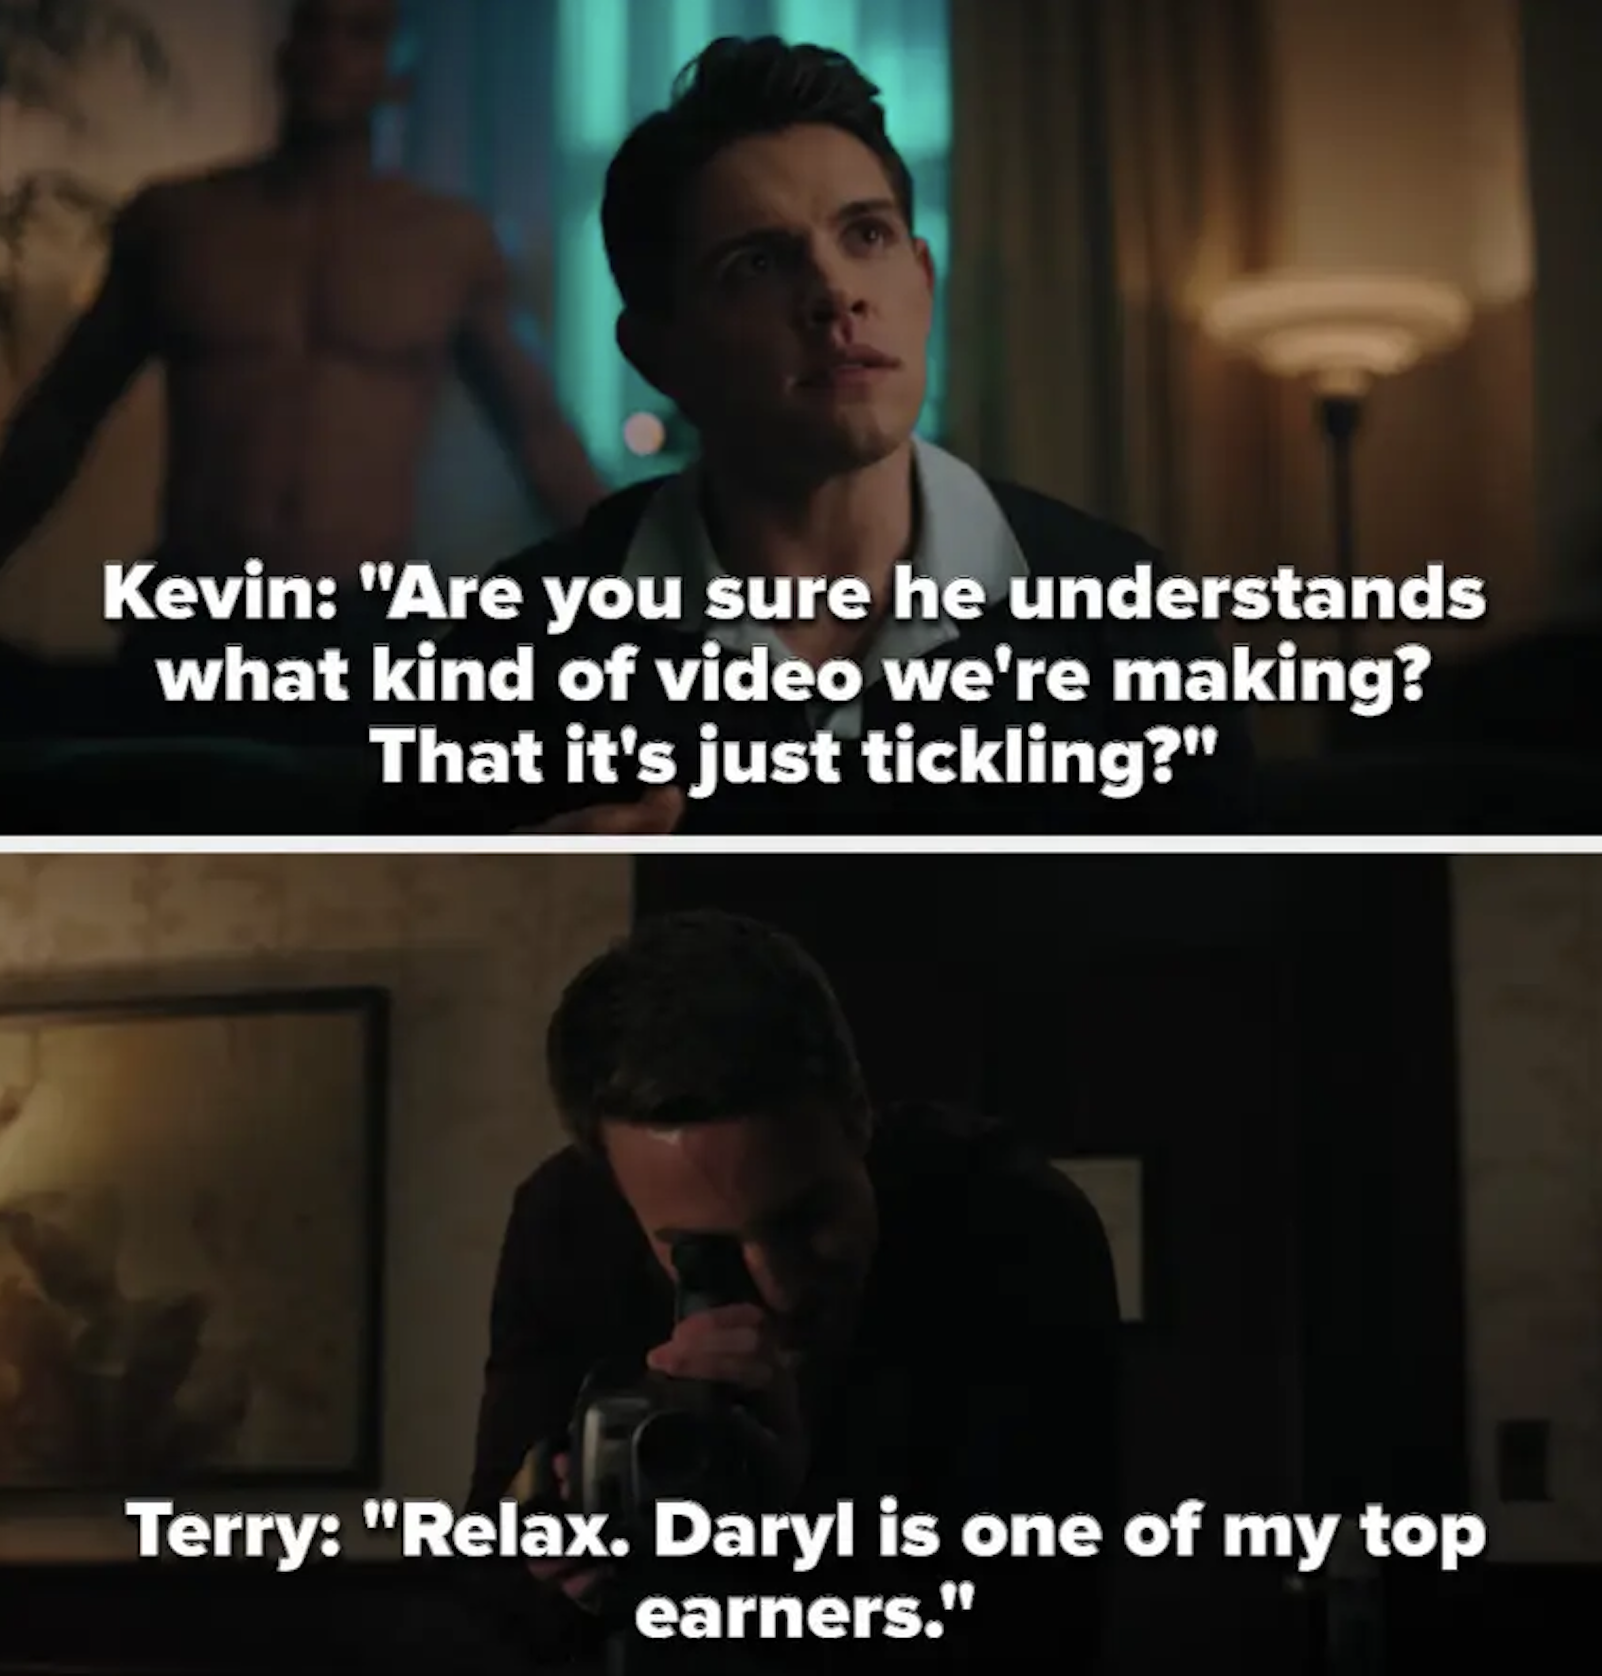 Kevin asking if Daryl understands they&#x27;re making tickling videos and Terry saying to relax